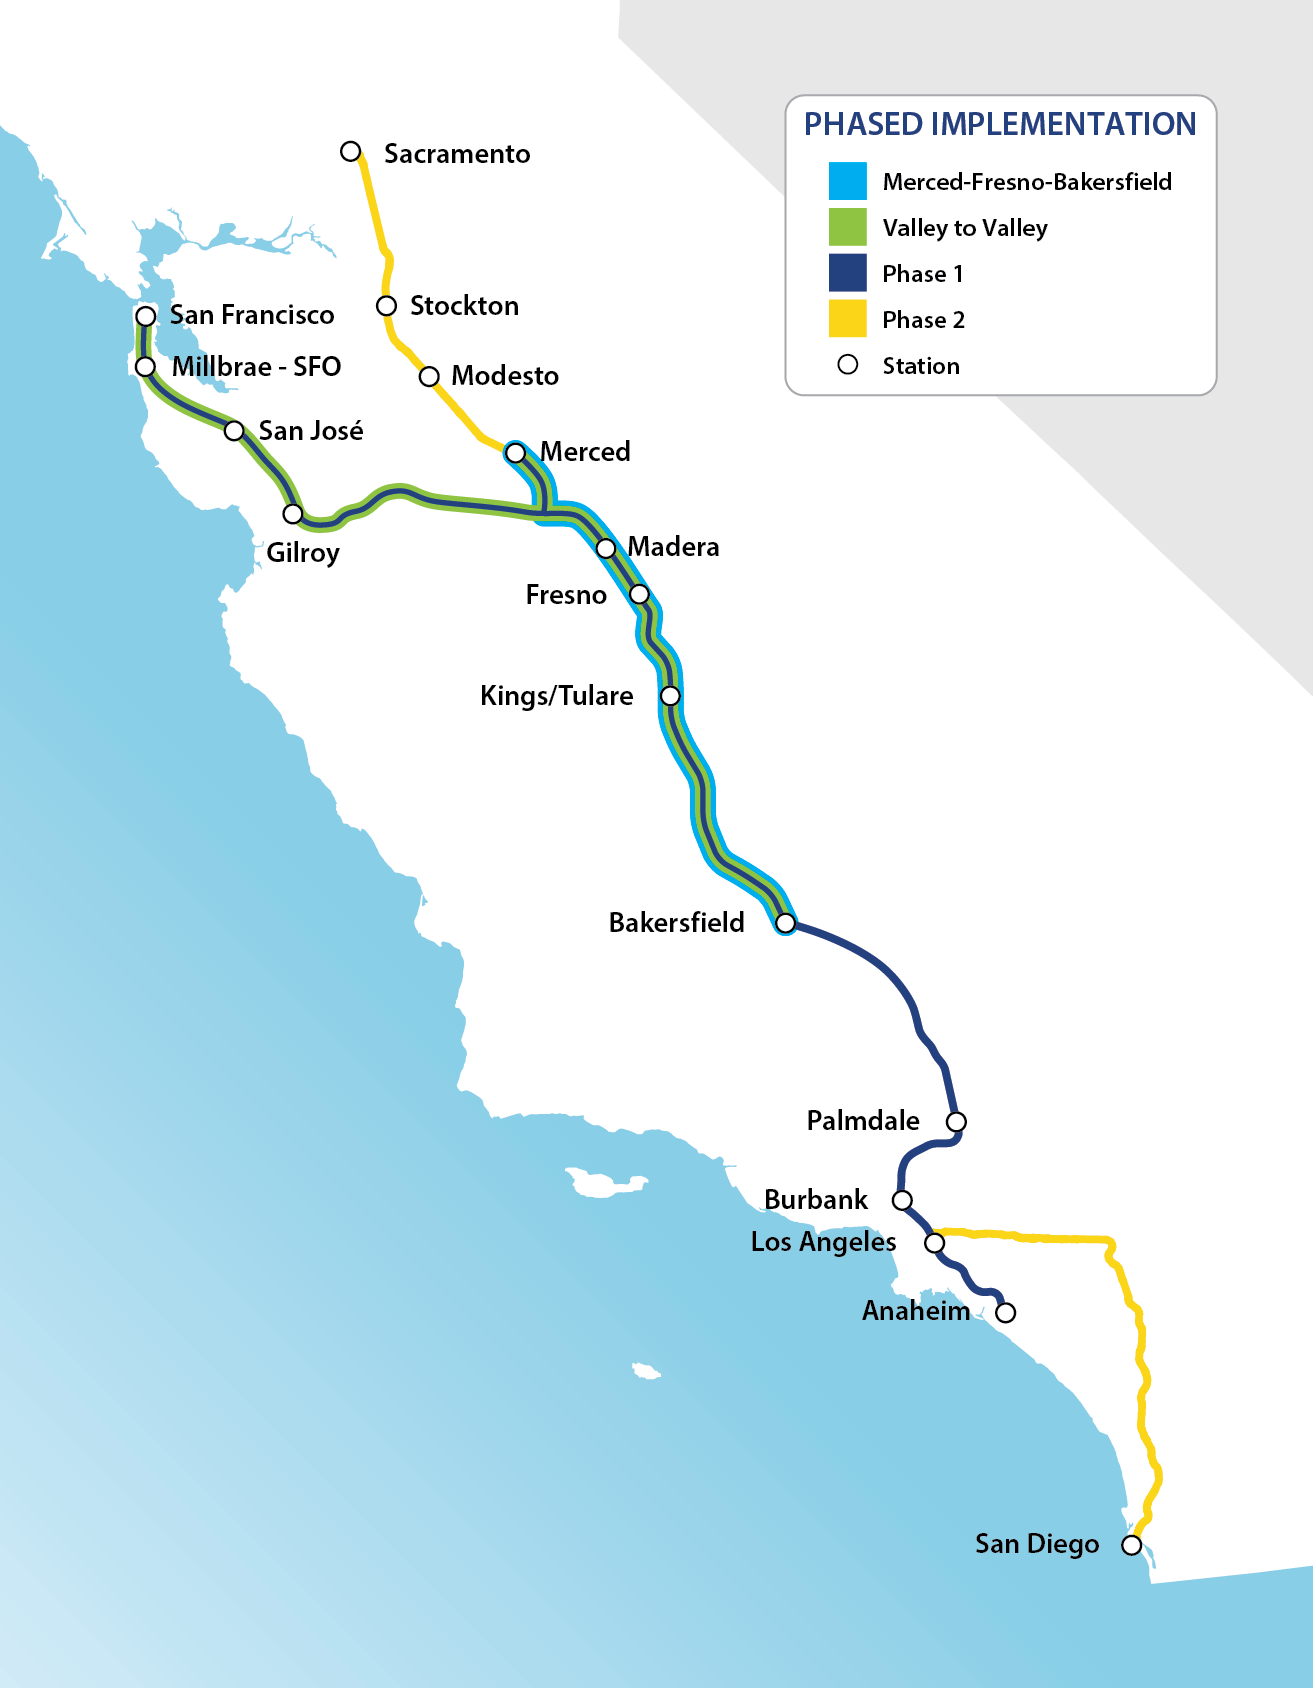 map of HSR alignment with a key to identify phases, stretches, and stations